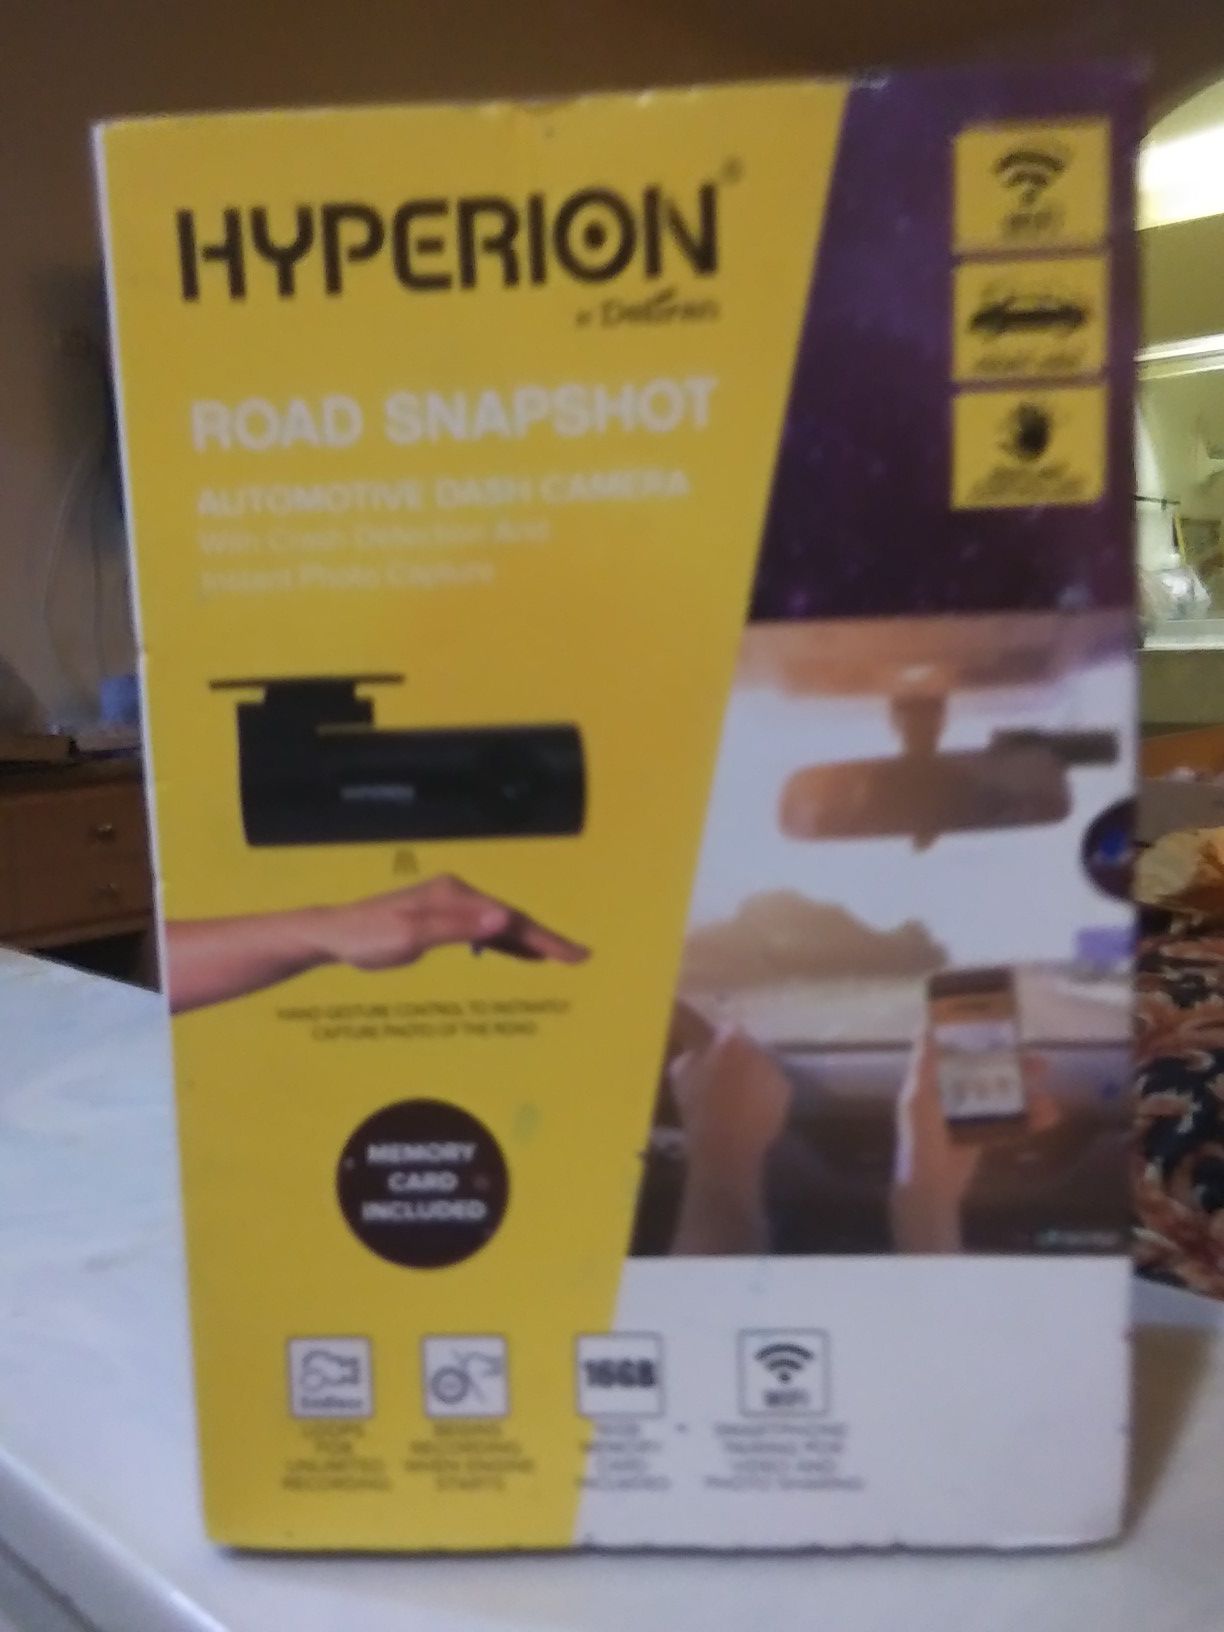 Hyperion road snapshot